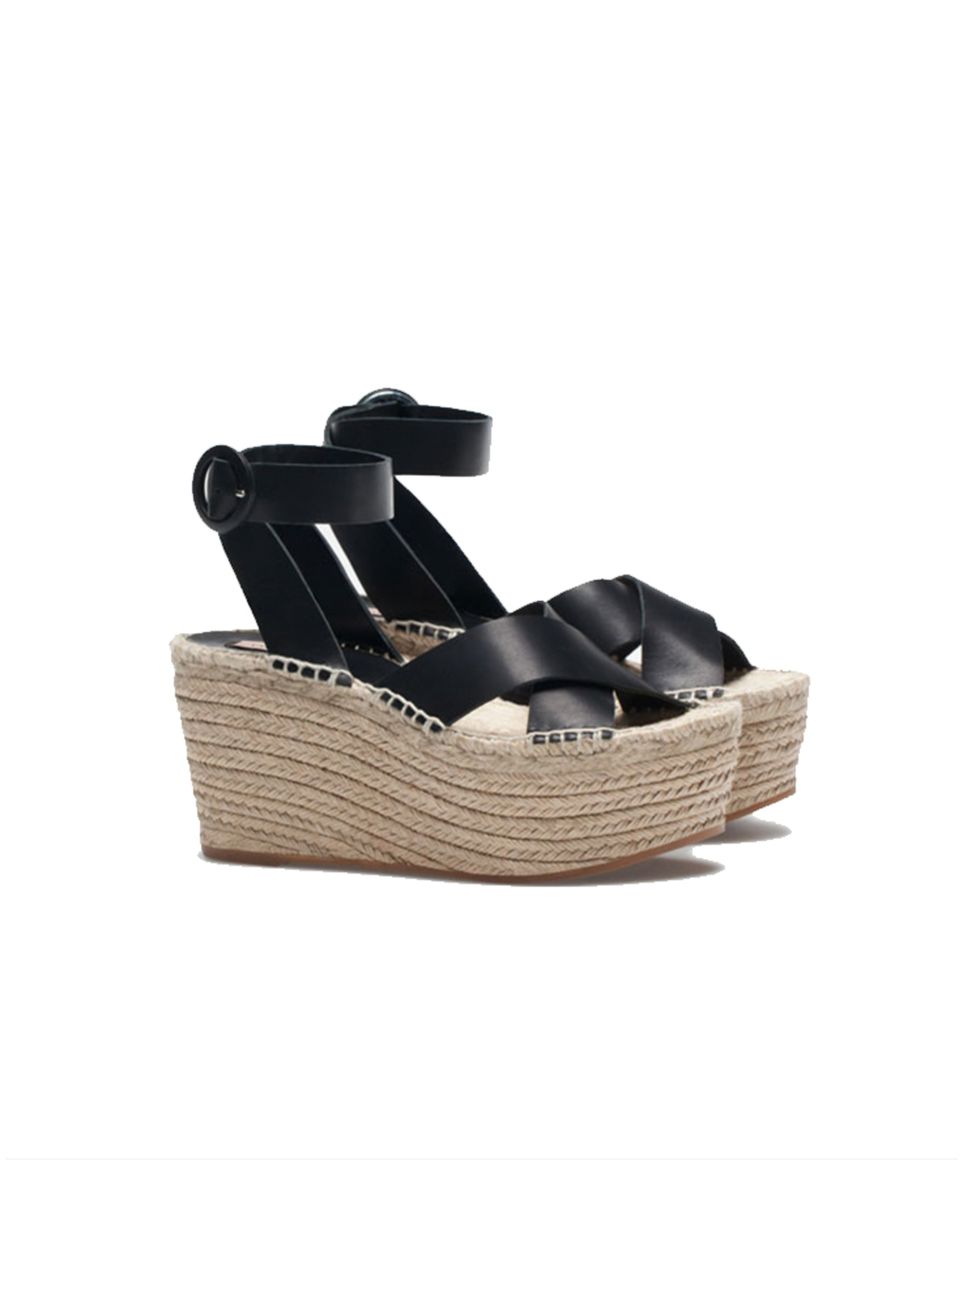 <p><a href="http://www.uterque.com/gb/en/new-collection/footwear/view-all/jute-wedges-c1102501p6261150.html?color=040" target="_blank">Uterqüe</a> wedges, £85</p>